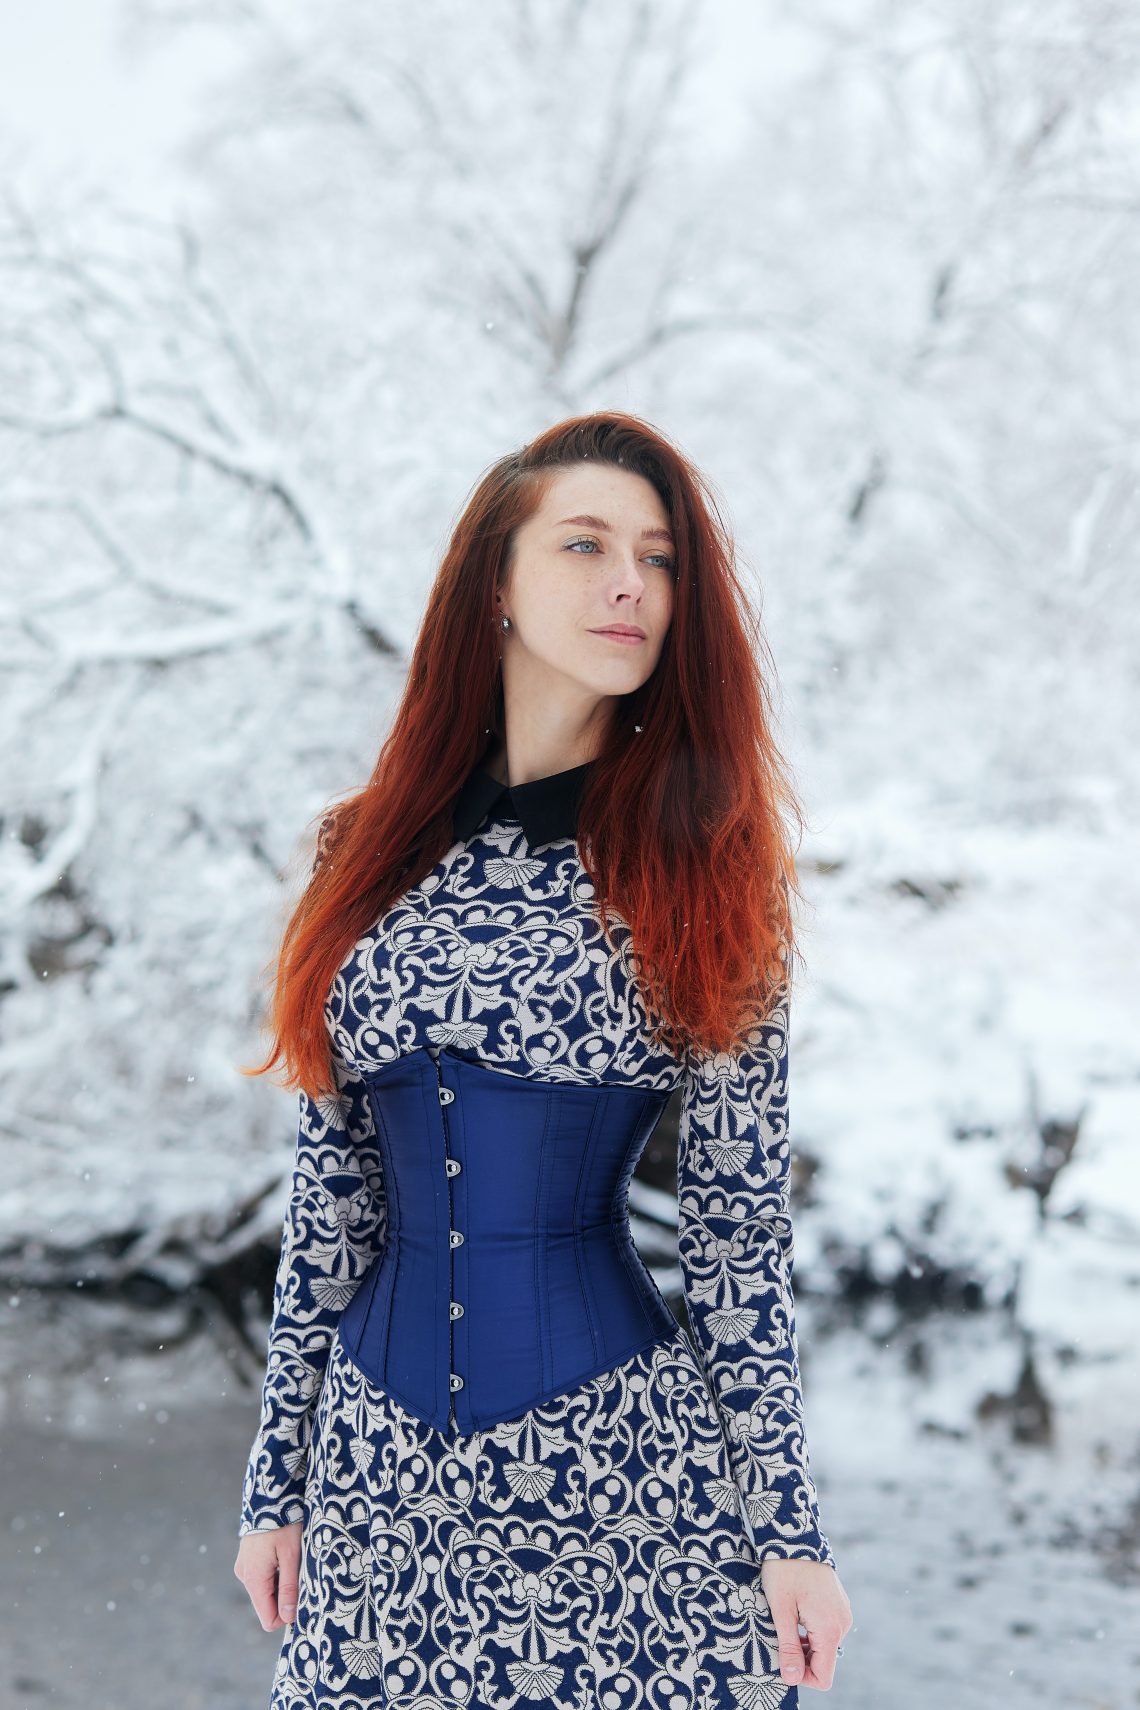 A spectacular winter portrait with a beautiful red-haired girl in a long dress and blue corset. Charming young woman posing in a snowy winter forest